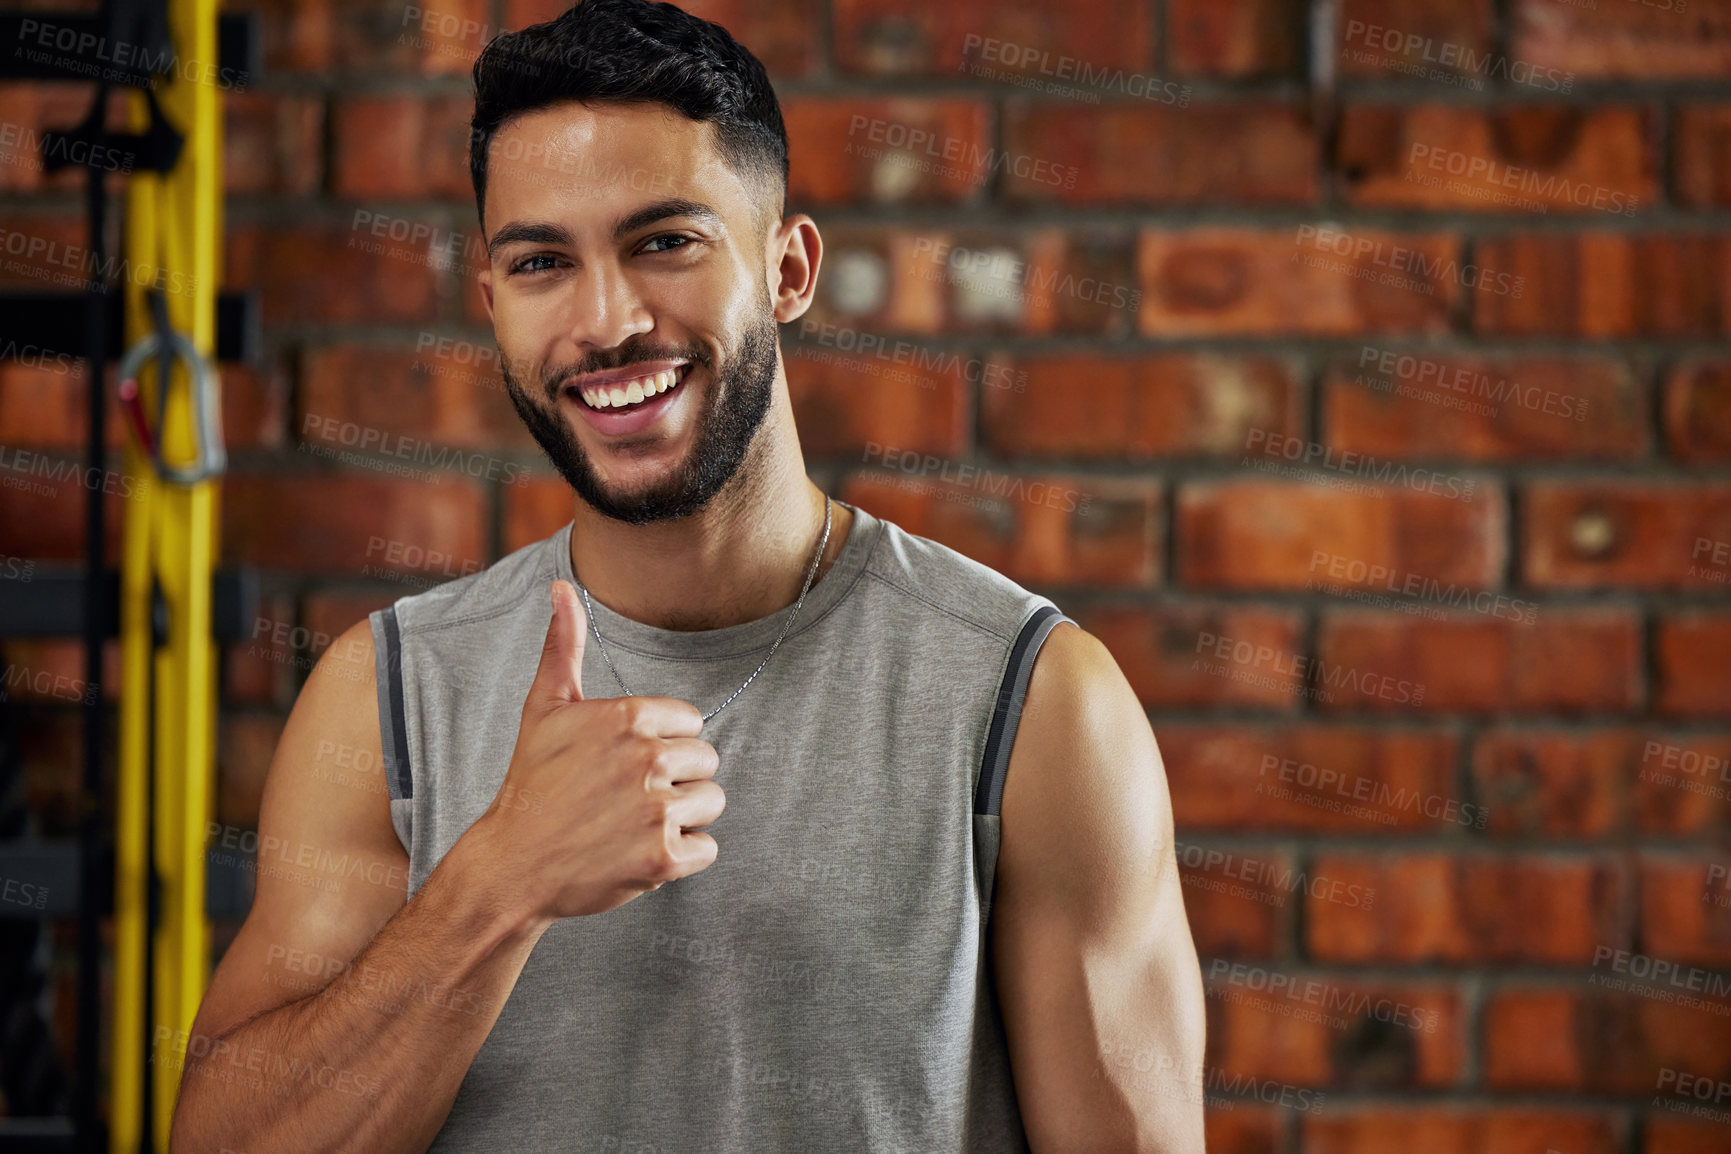 Buy stock photo Fitness, thumbs up and portrait of man in gym, motivation and confident smile with agreement emoji. Happiness, workout and happy face of bodybuilder with winning hand gesture for health and training.